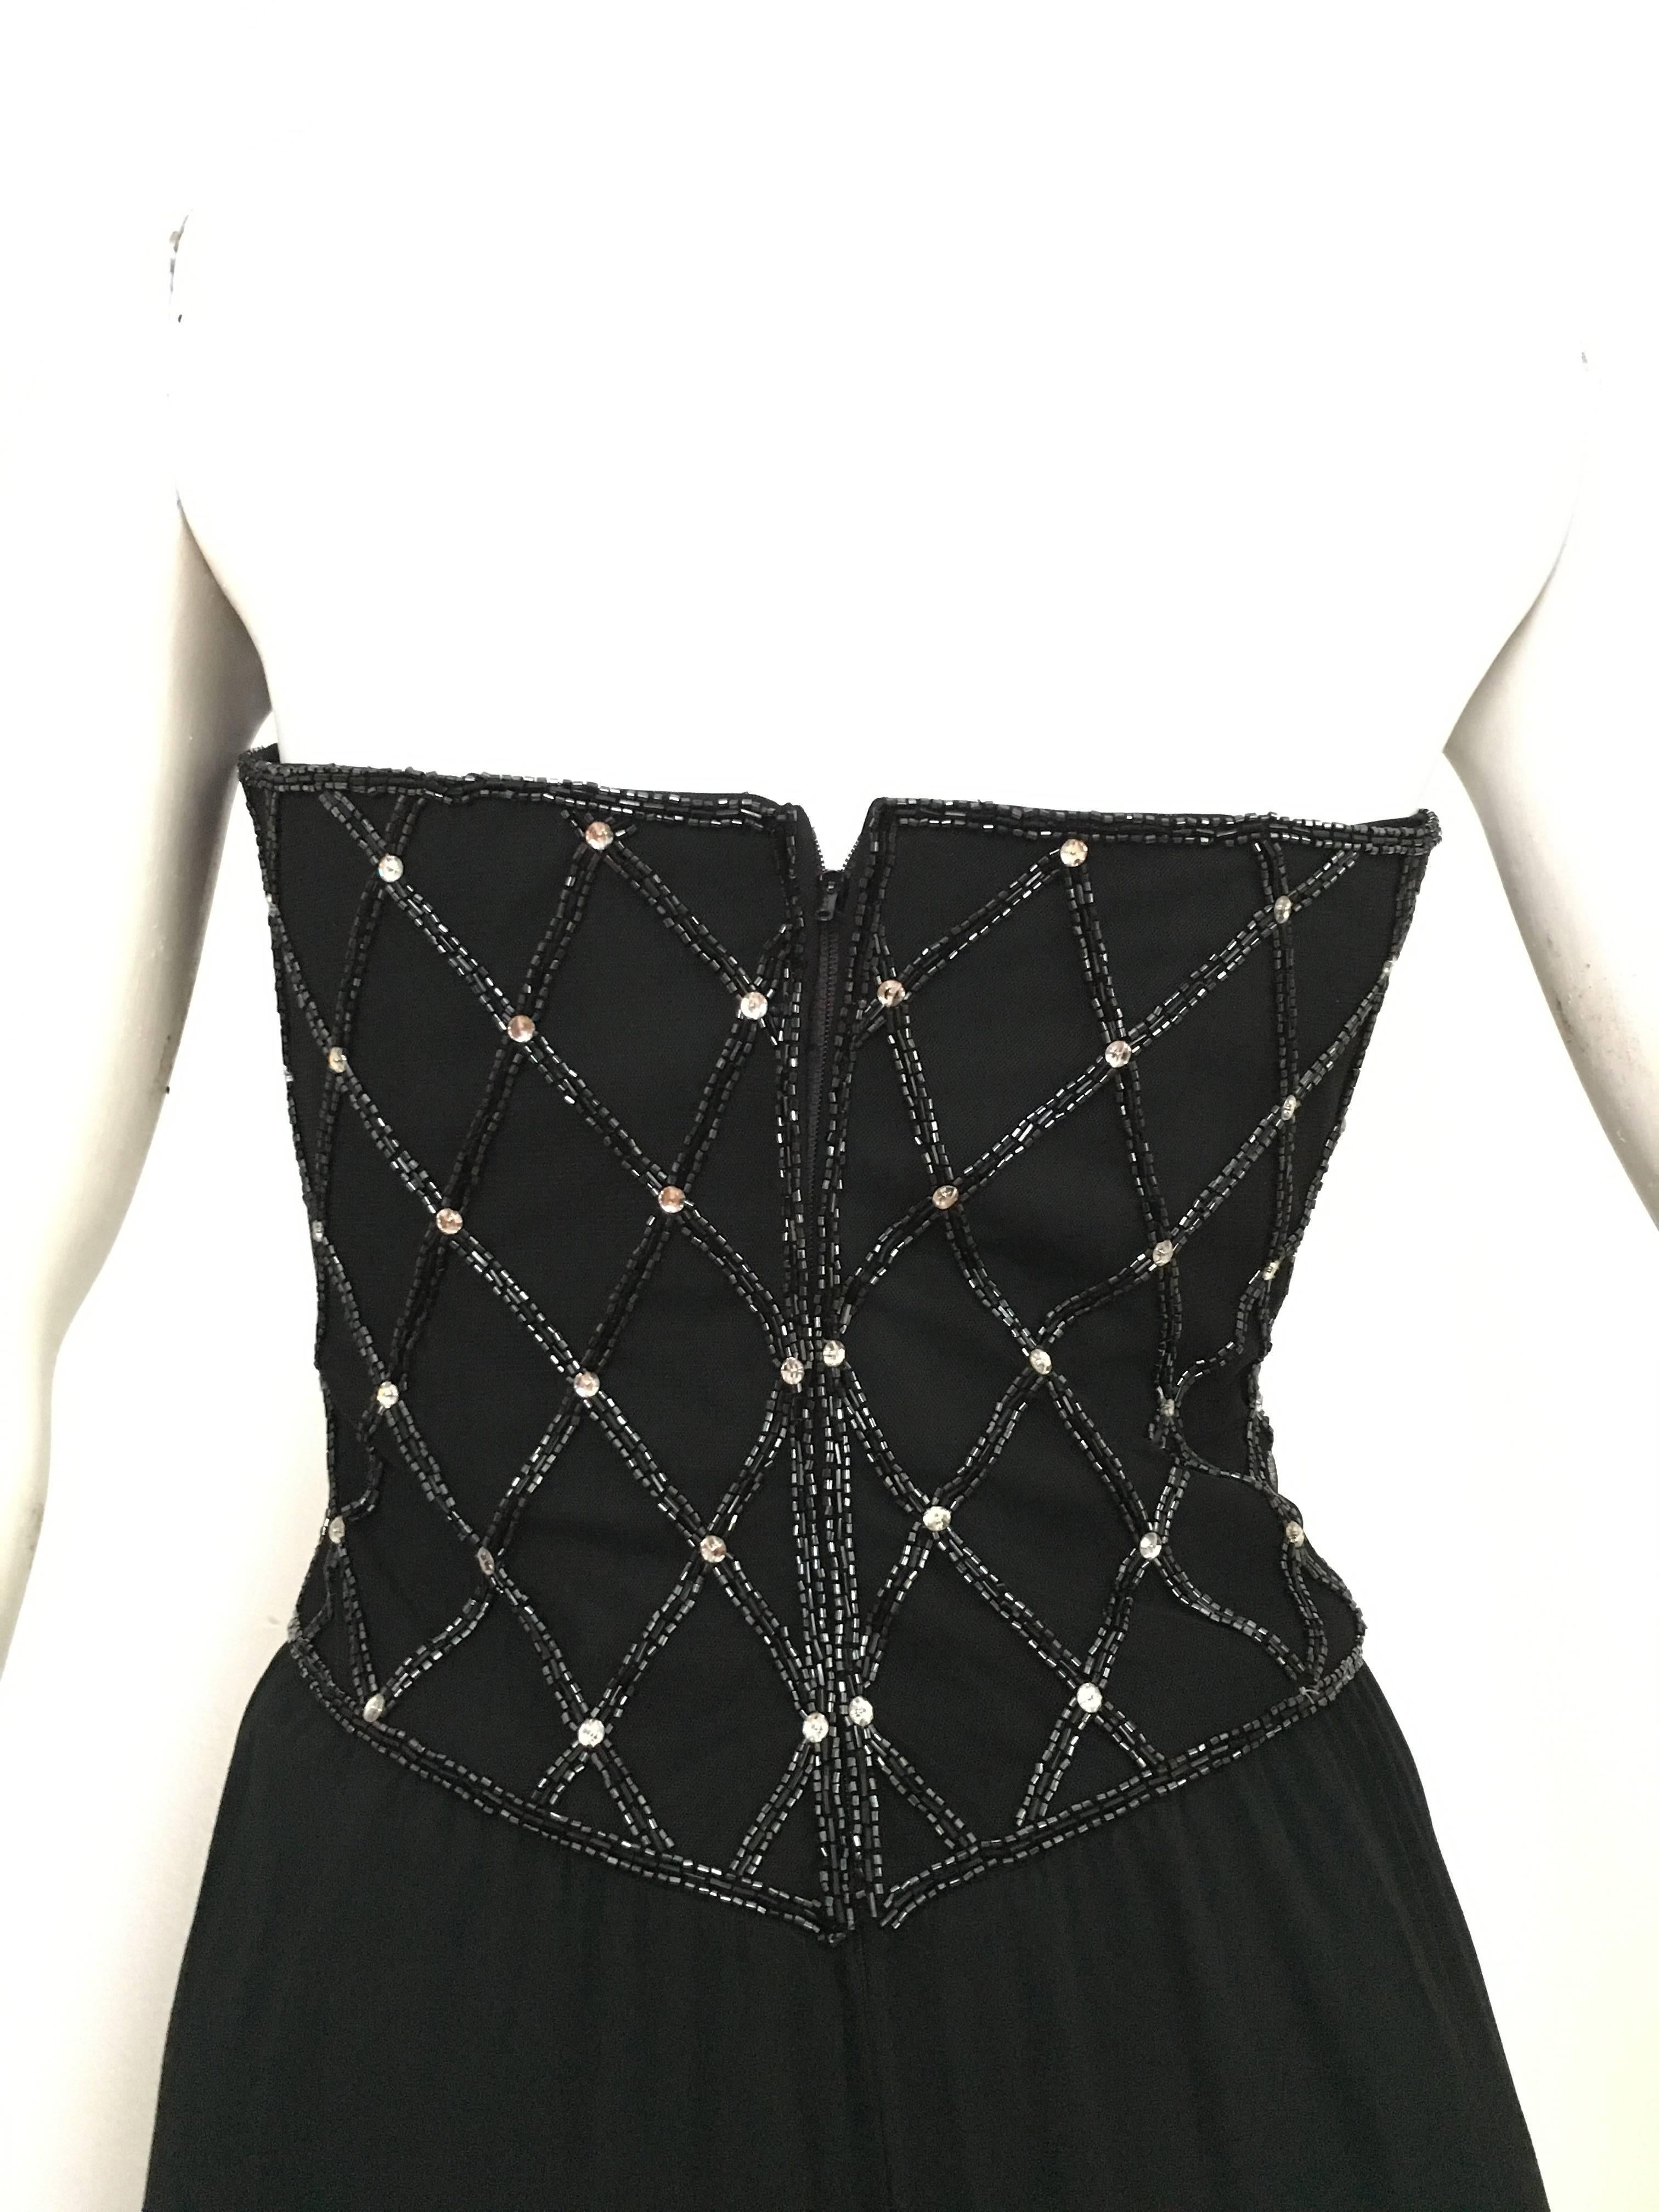 Bob Mackie Black Sequin Strapless Gown Size 6. 3